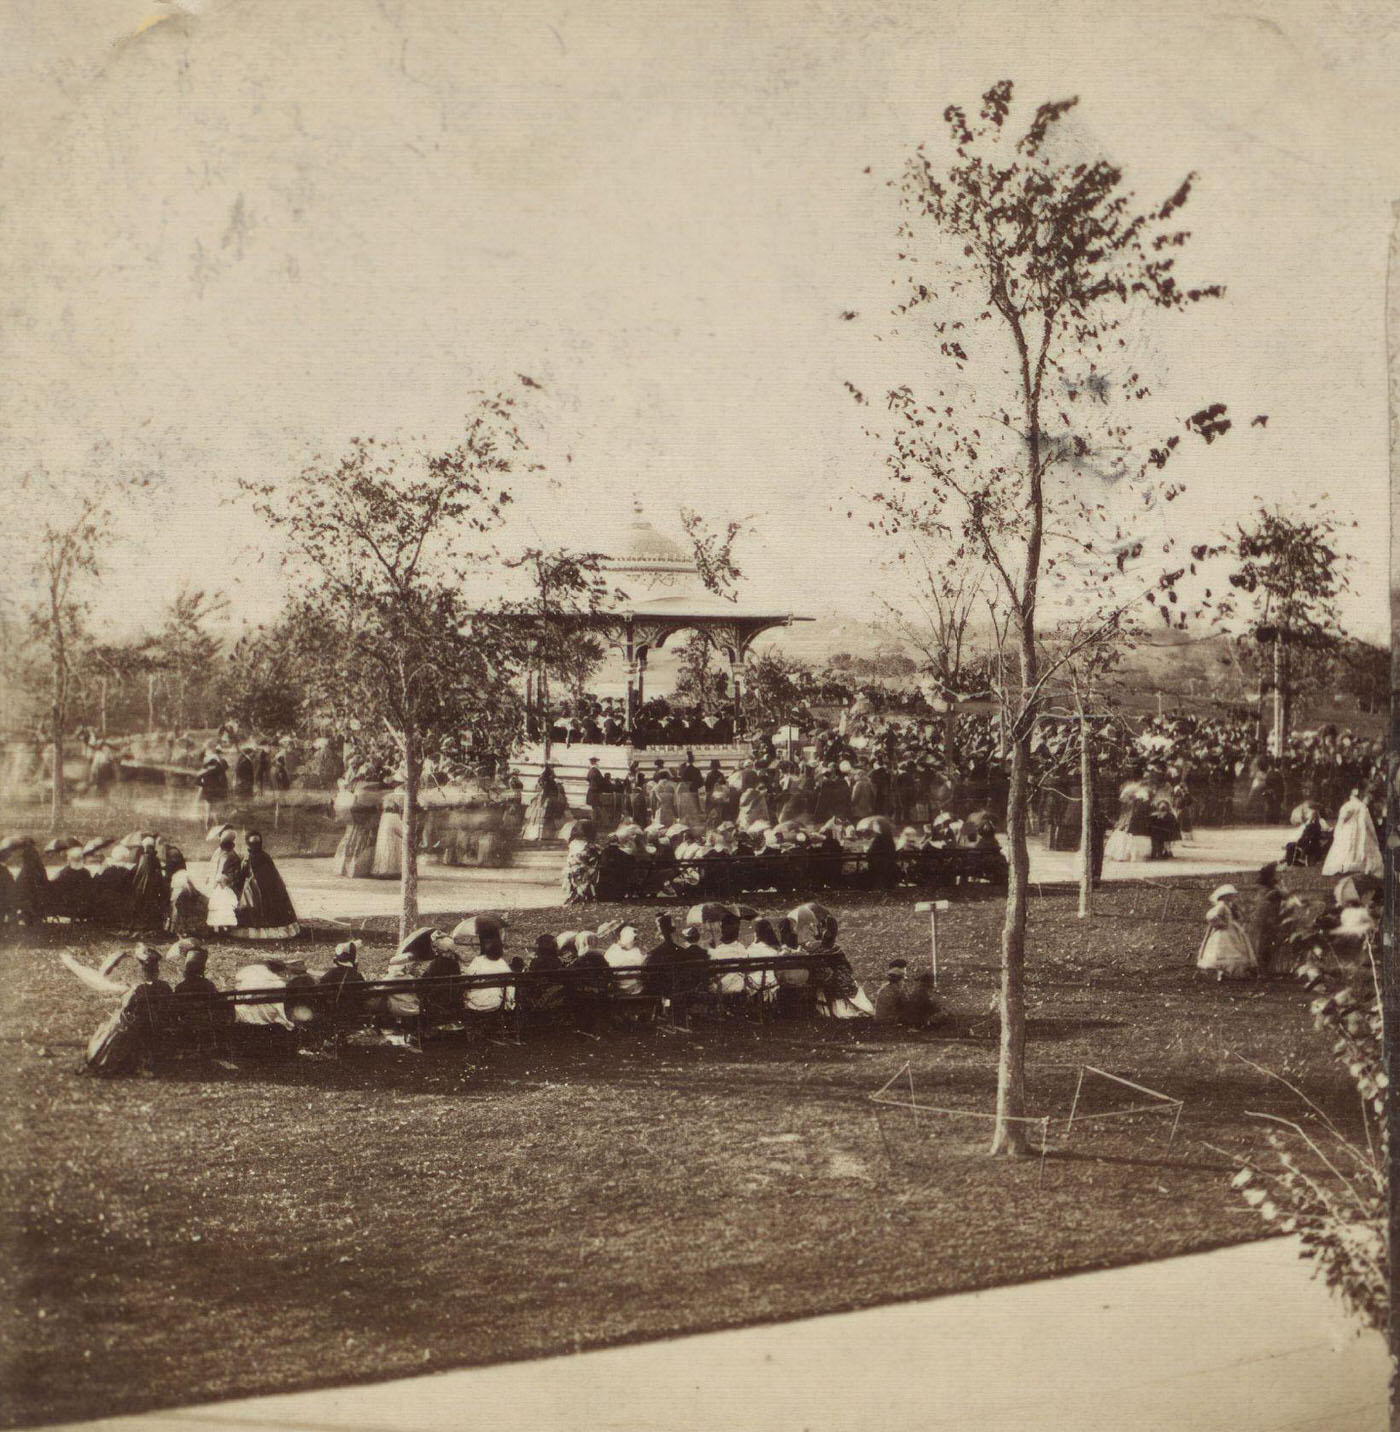 Music Day, Central Park, Crowd At An Event At The Music Pavilion, Manhattan, 1890S